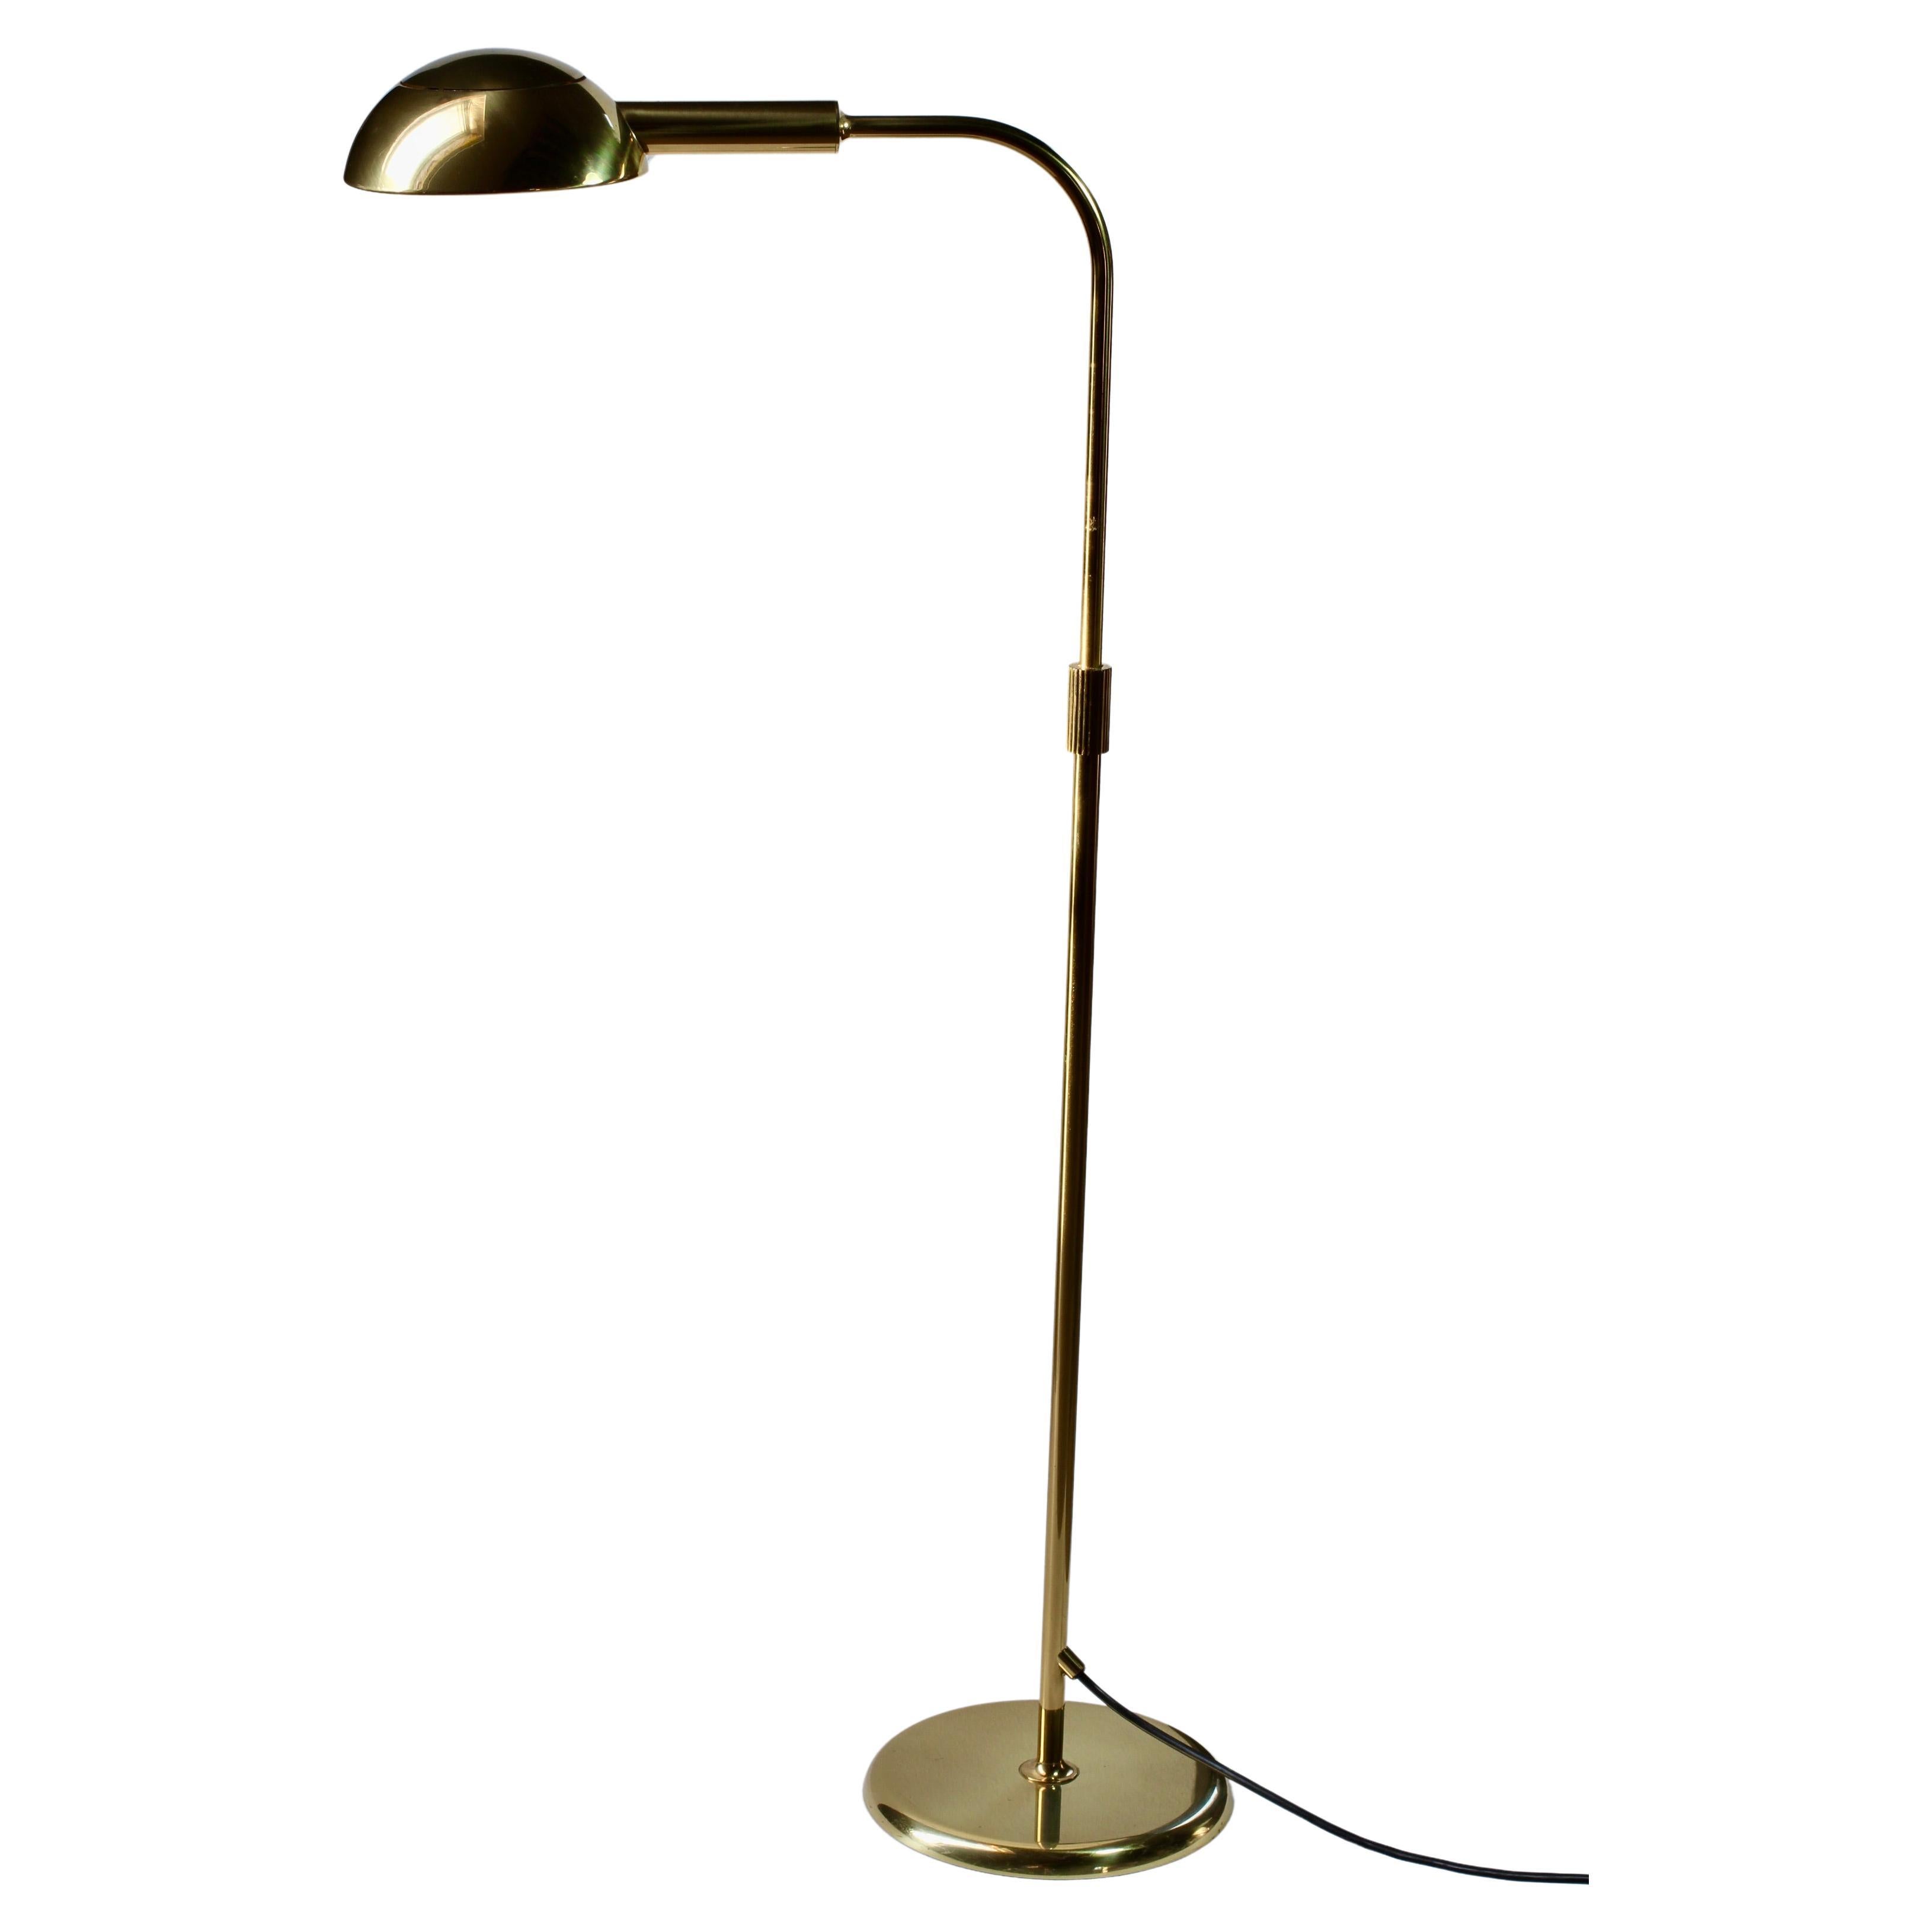 Rare Mid-Century Modern vintage German made dimmable floor lamp by Florian Schulz circa late 1970s -early 1980s. Featuring polished brass (now with age related patina) and height adjustable as is the round brass shade making this the perfect